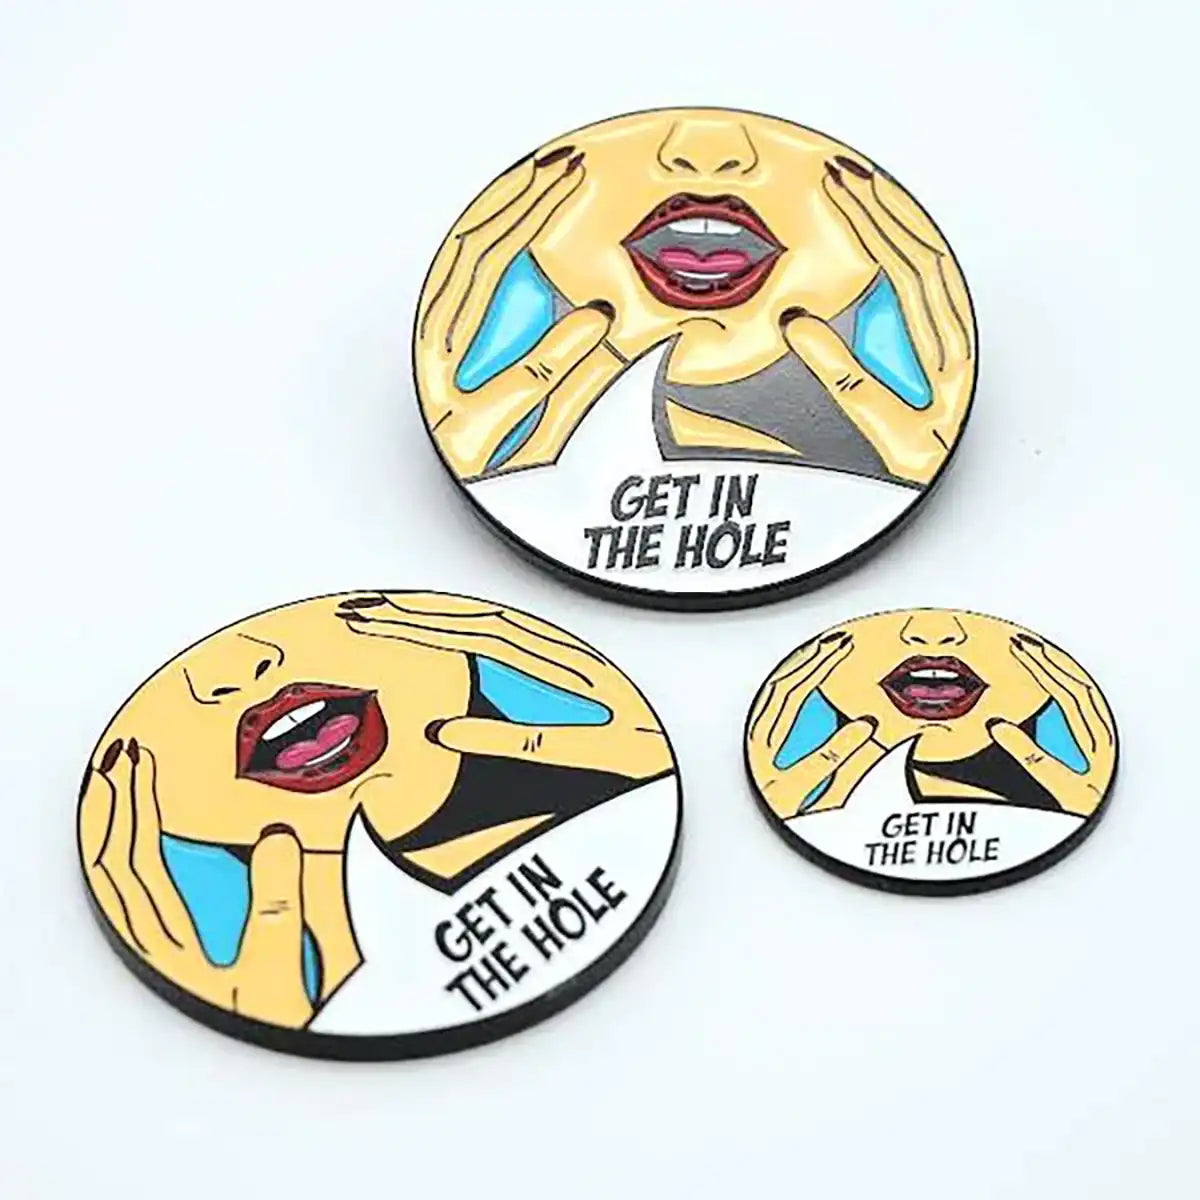 Ball Marker GET IN THE HOLE by Max und Moritz